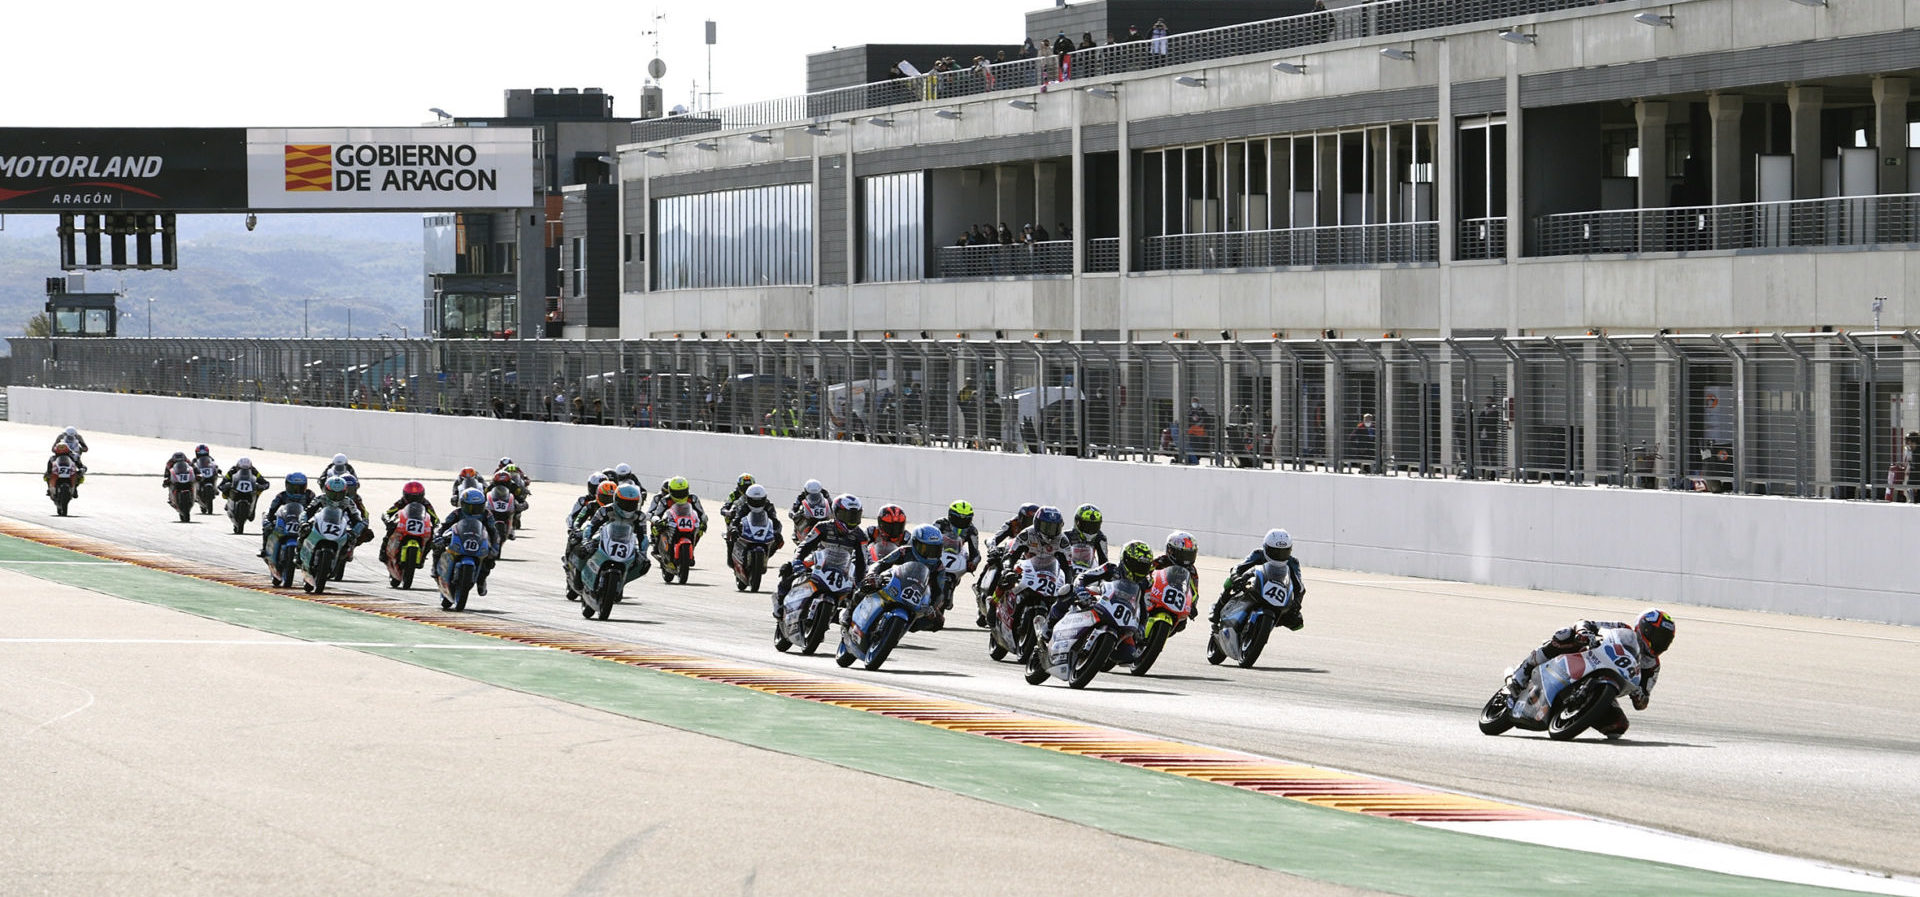 The start of a European Talent Cup race at Motorland Aragon. Photo courtesy Repsol CEV Press Office.